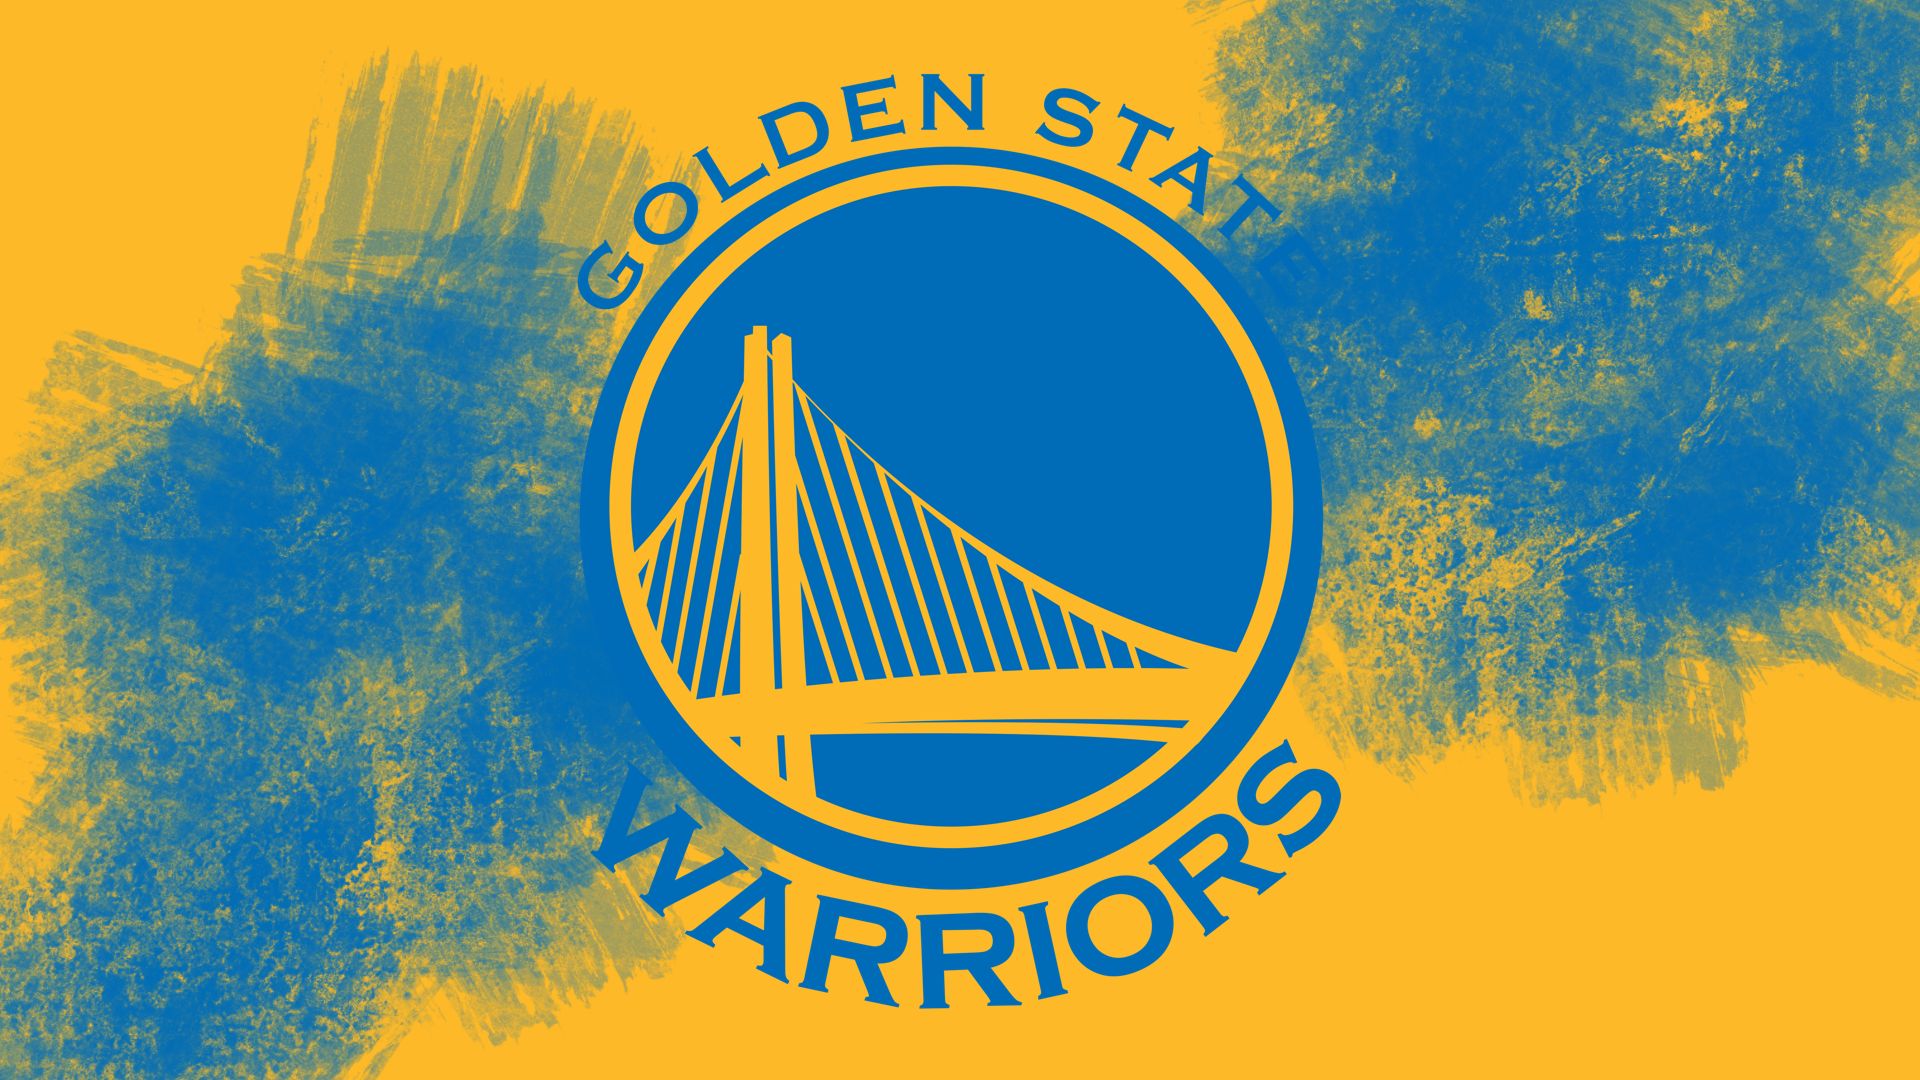 Golden State Warriors wallpaper for desktop, download free Golden State Warriors picture and background for PC